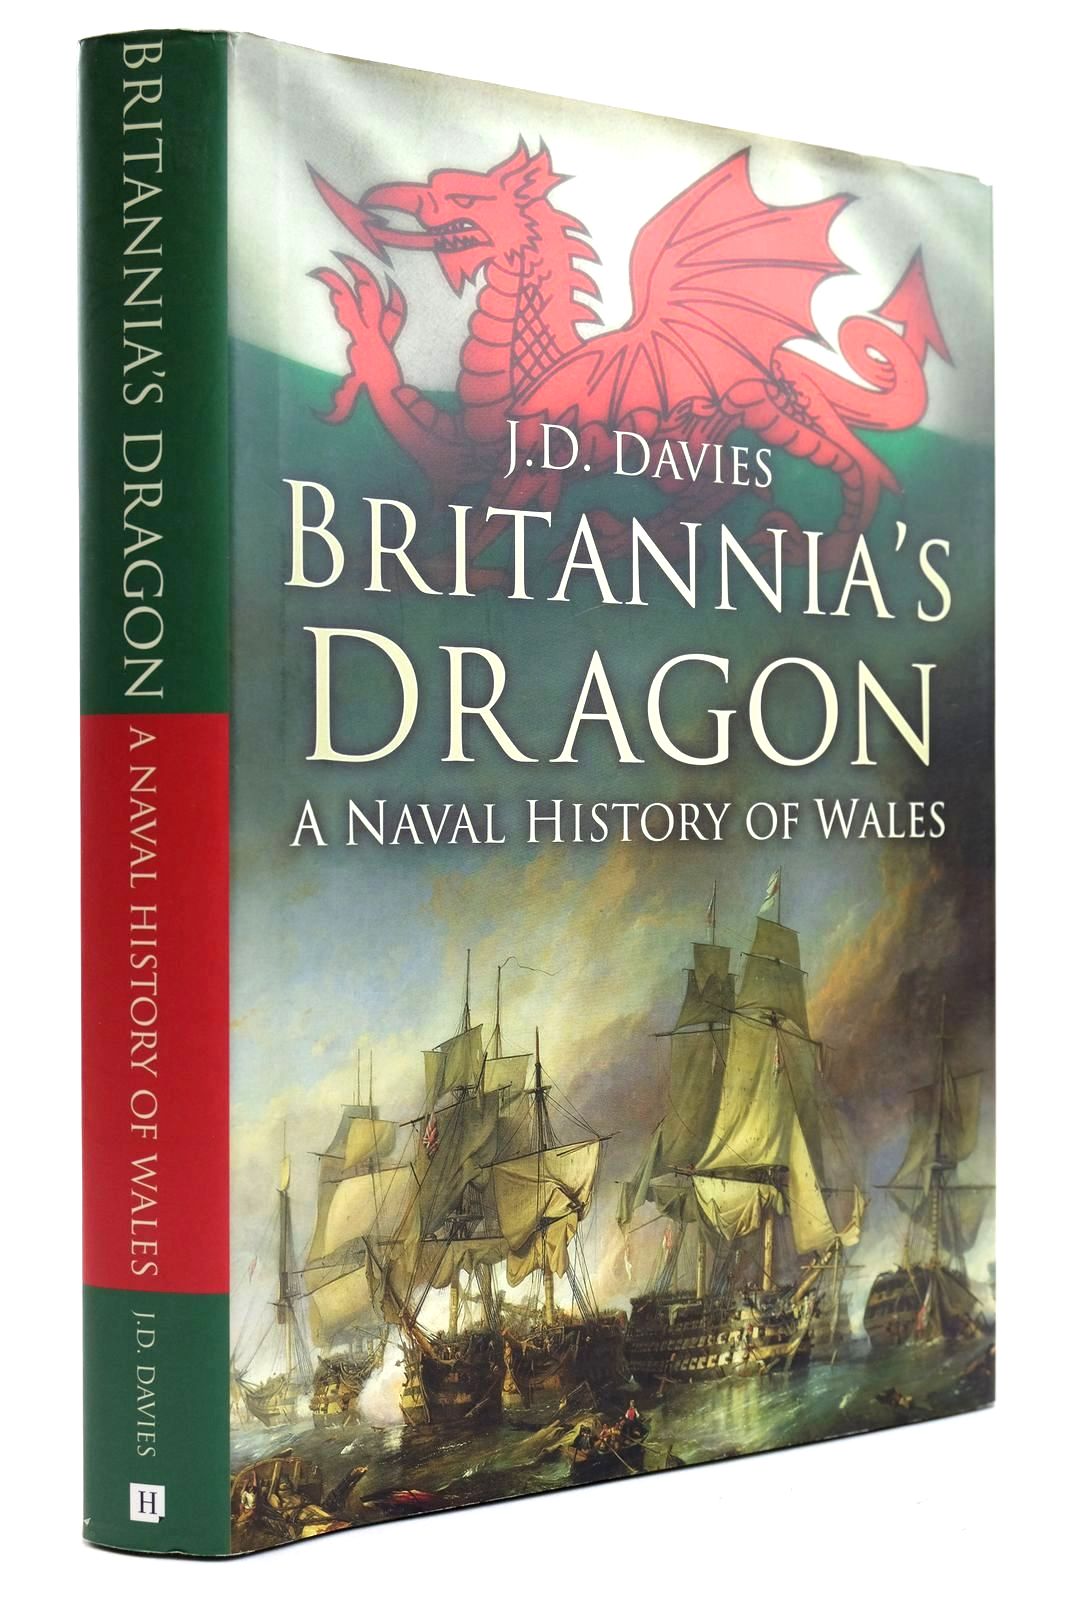 Photo of BRITANNIA'S DRAGON A NAVAL HISTORY OF WALES written by Davies, J.D. published by The History Press (STOCK CODE: 2132480)  for sale by Stella & Rose's Books